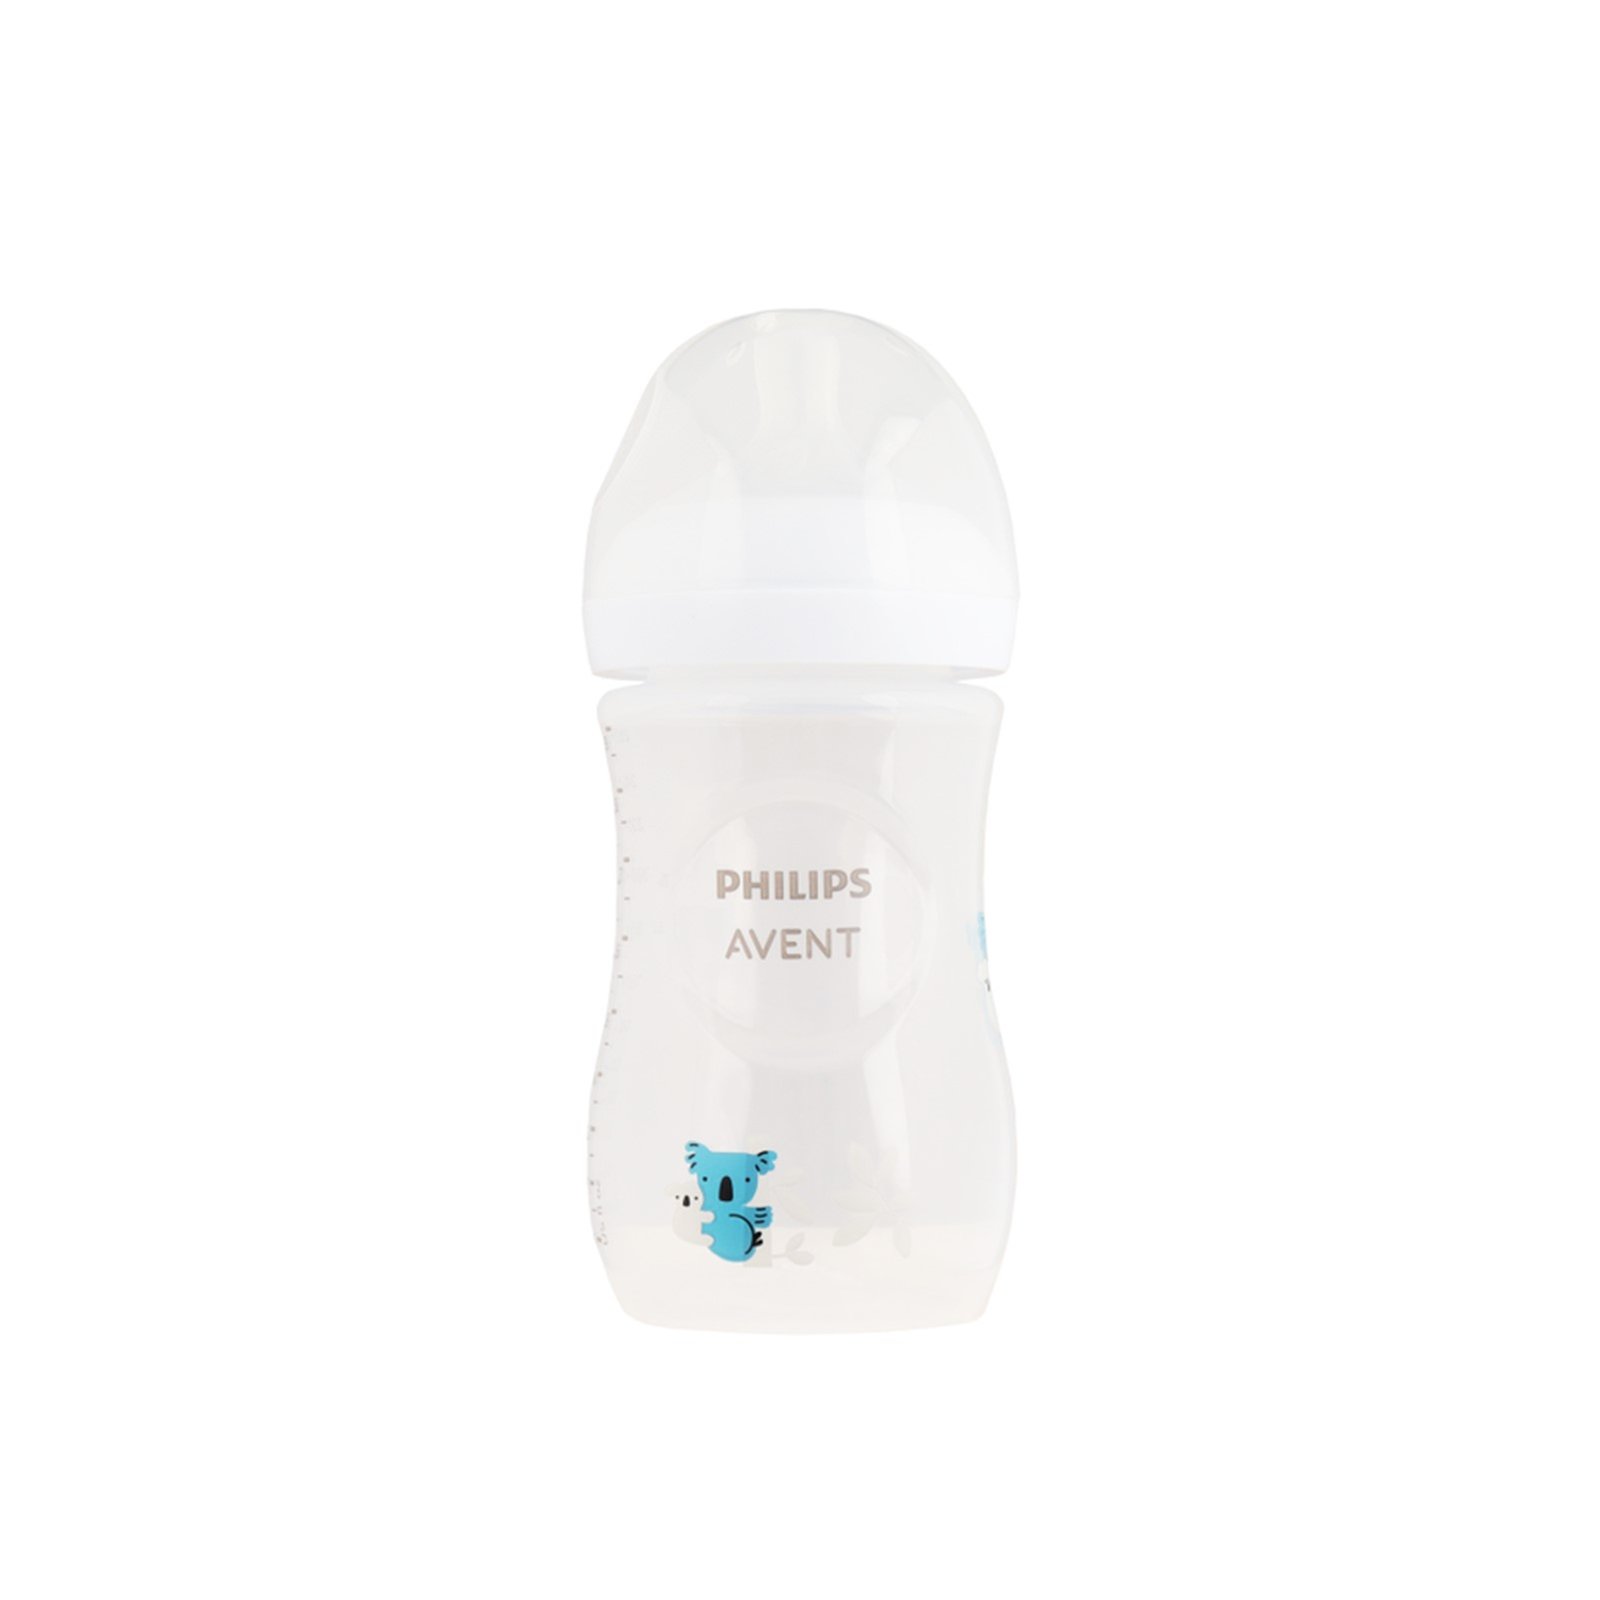 Philips Avent Natural Response Bottle 260ml, 1m+, FOR BABIES